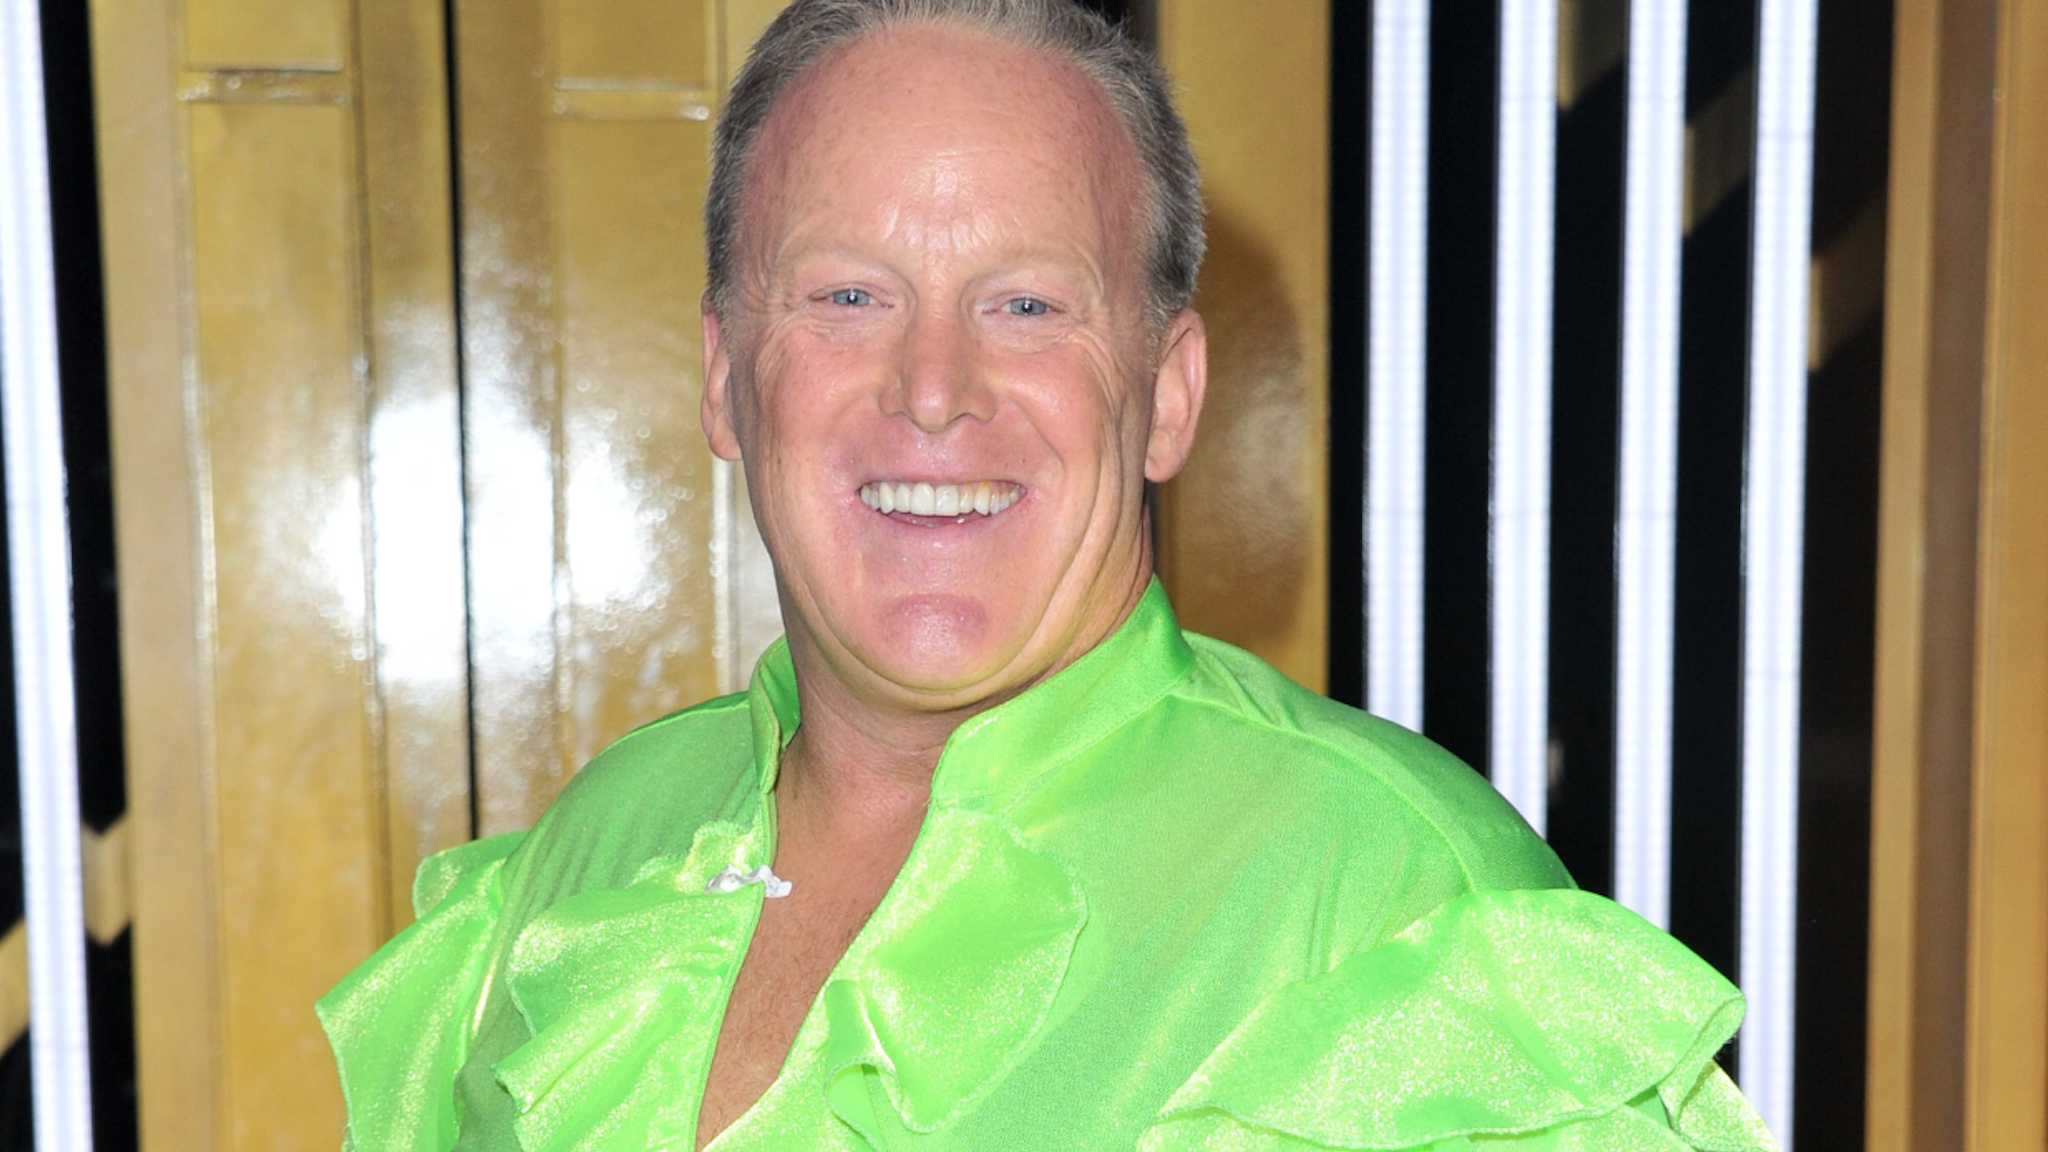 Sean Spicer attends the "Dancing With The Stars" Season 28 show at CBS Television City on September 16, 2019 in Los Angeles, California